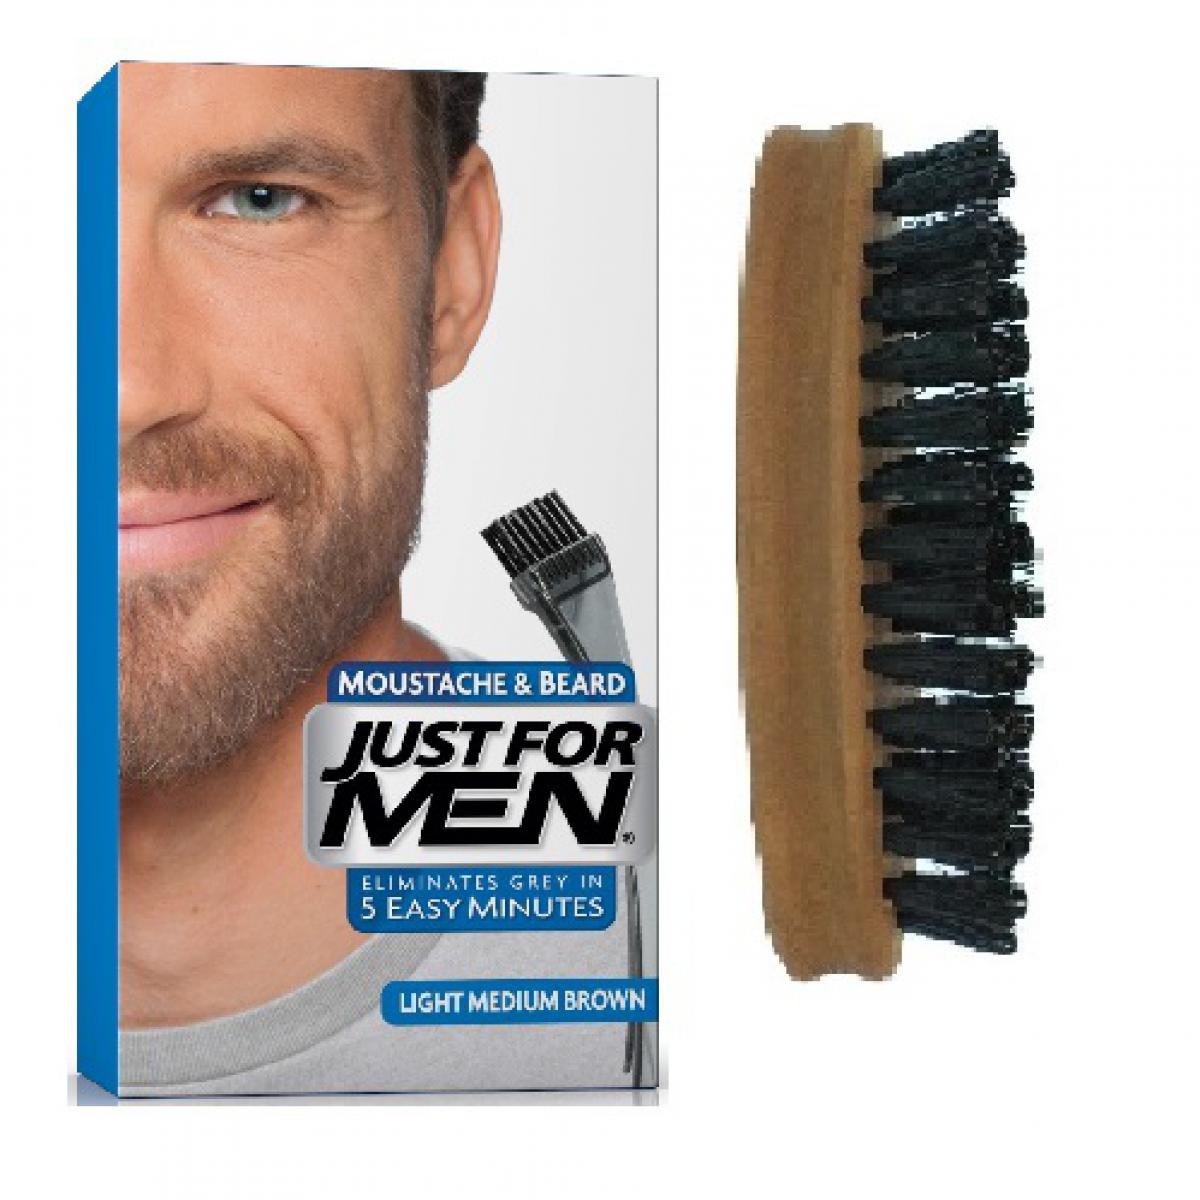 Promo : PACK COLORATION BARBE & BROSSE A BARBE - Chatain Moyen Clair